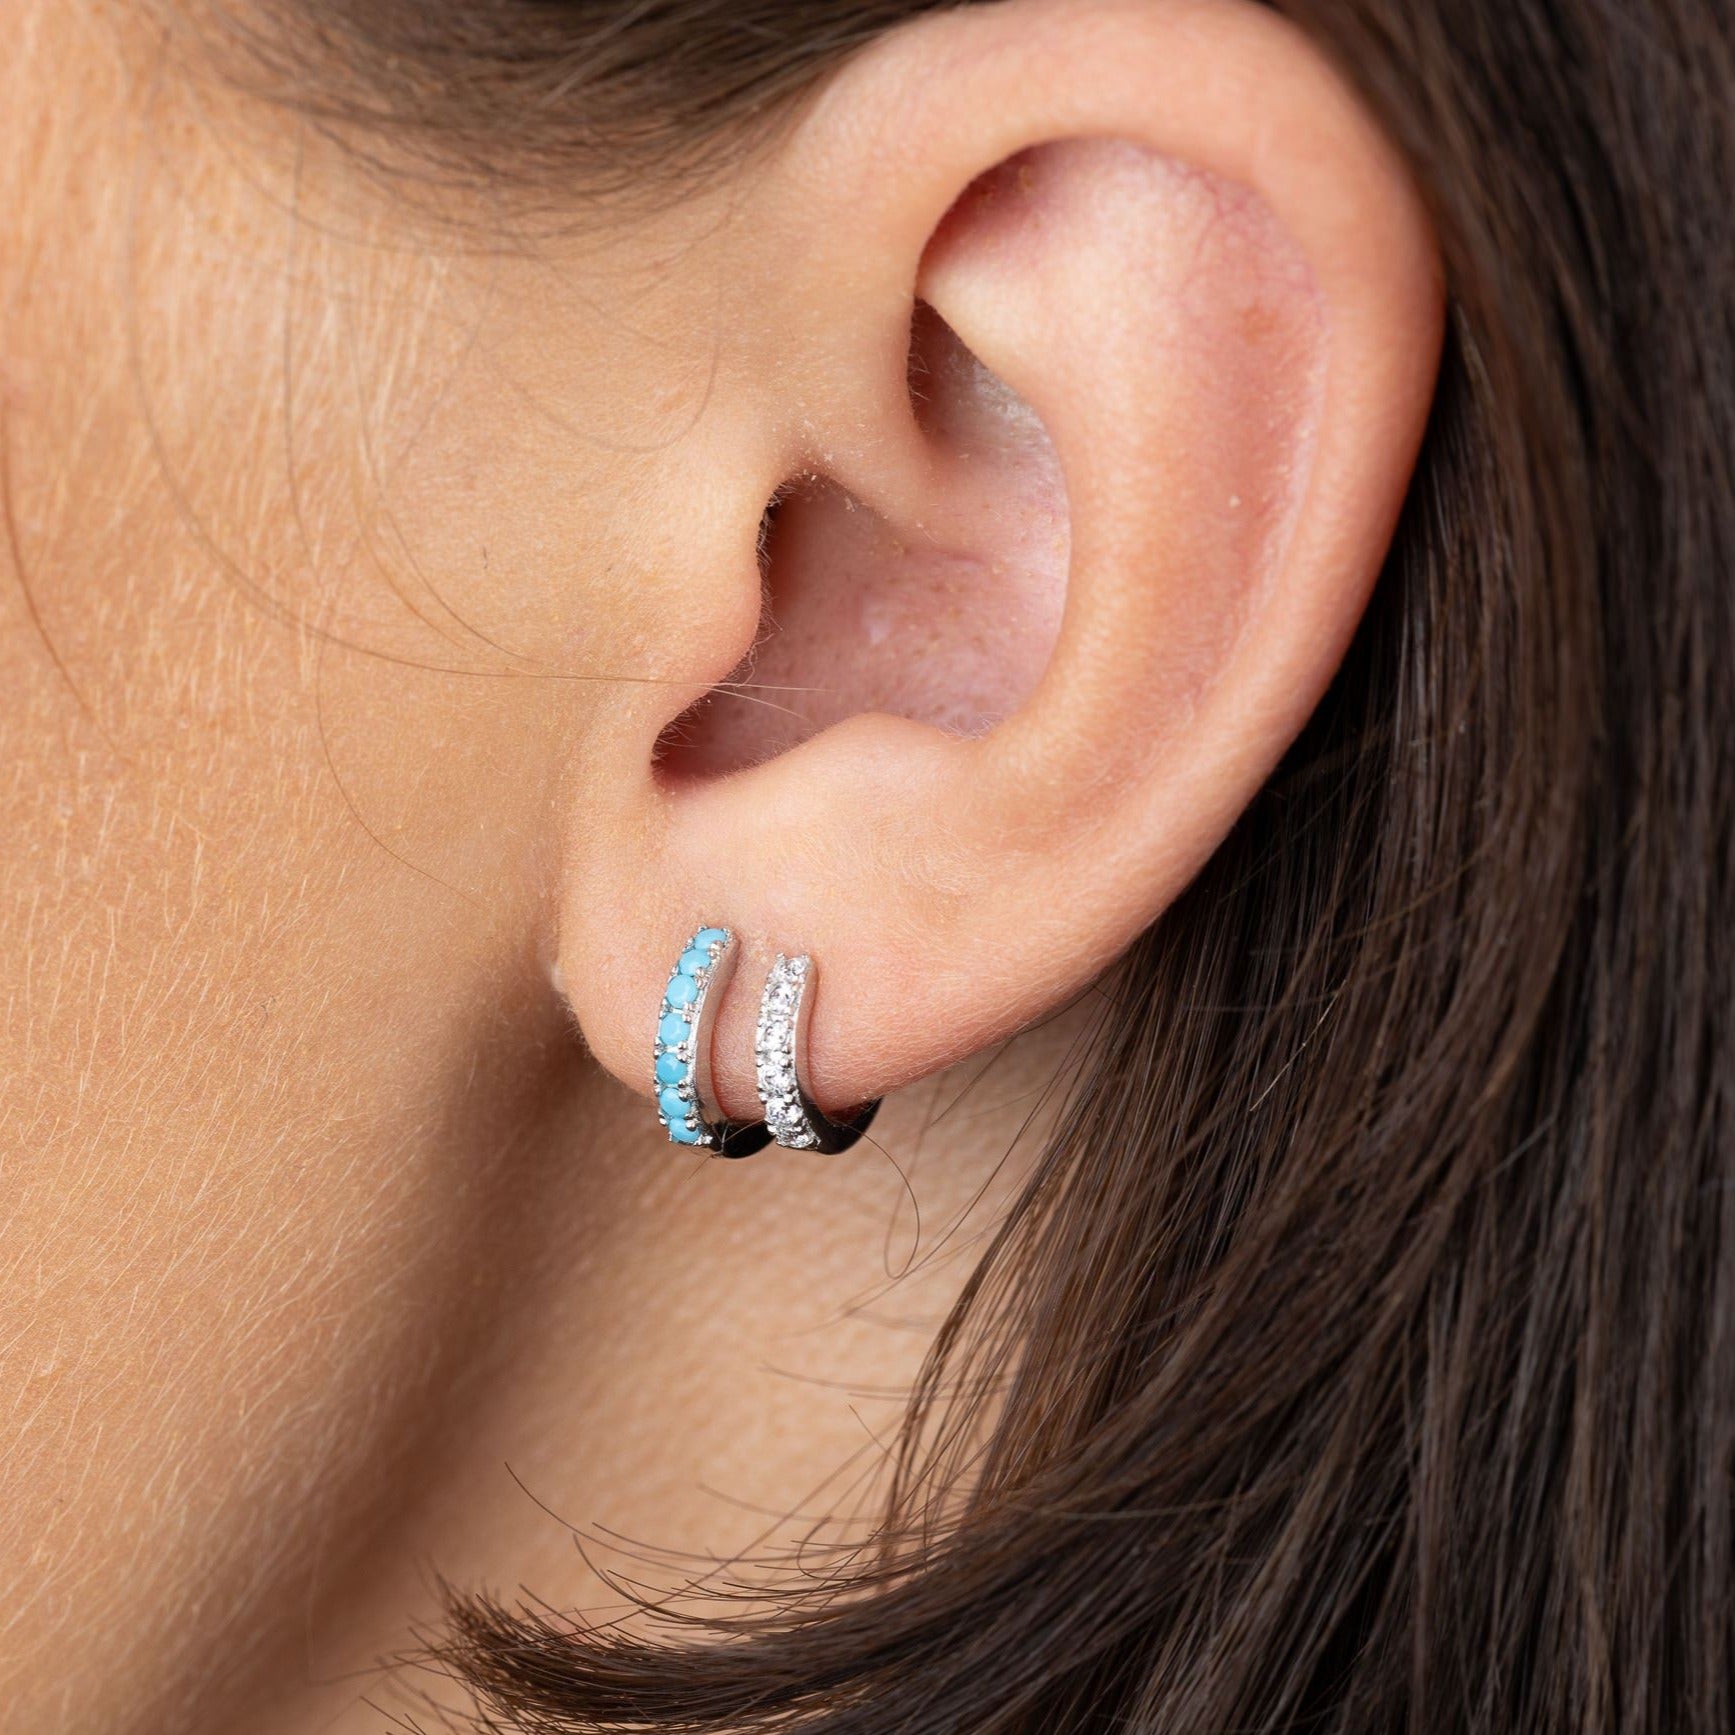 Mismatched Double Huggie Hoop Earrings with Turquoise Stones by Scream Pretty